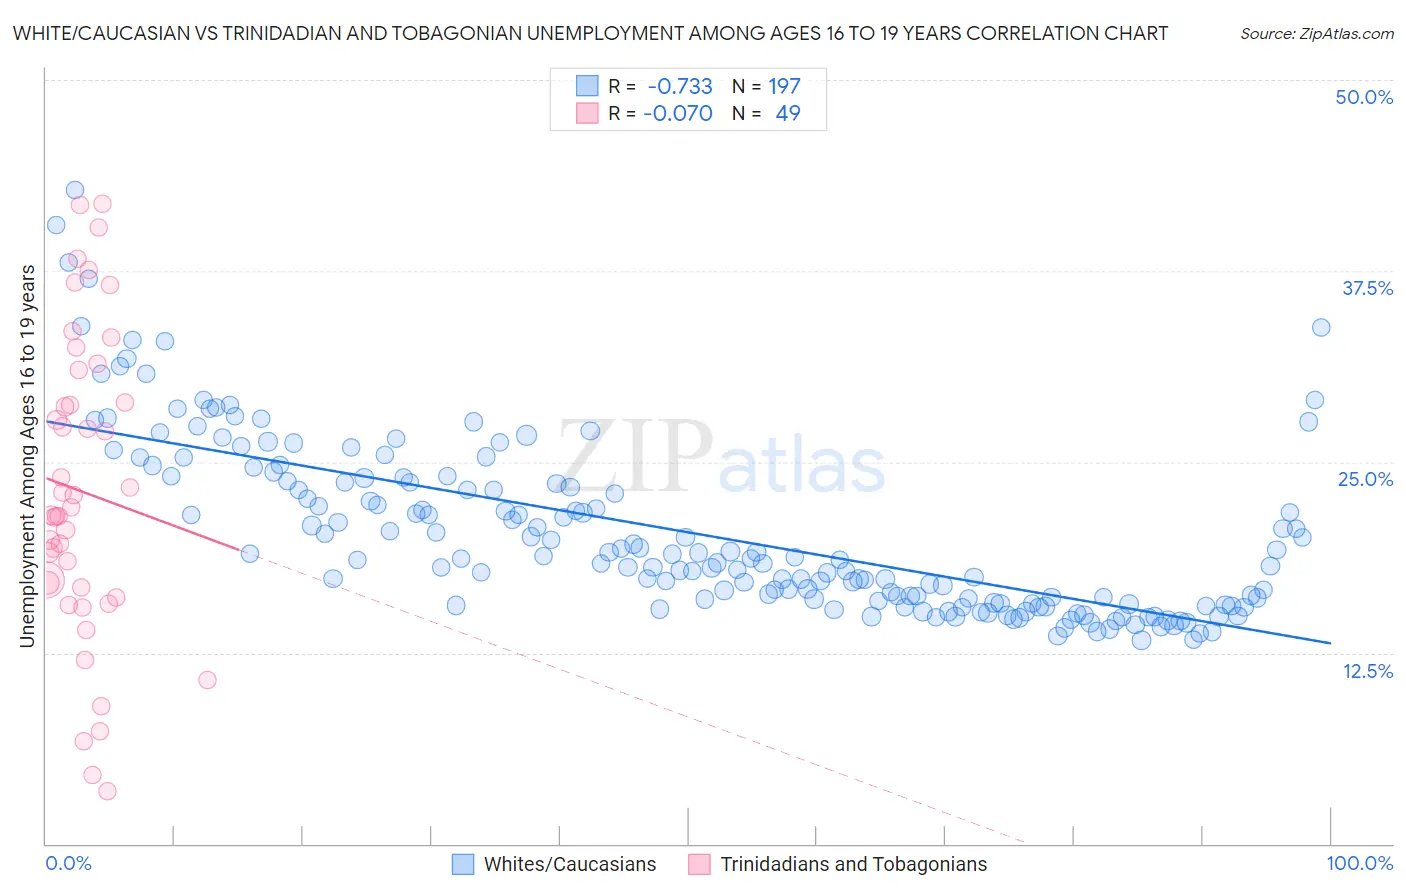 White/Caucasian vs Trinidadian and Tobagonian Unemployment Among Ages 16 to 19 years